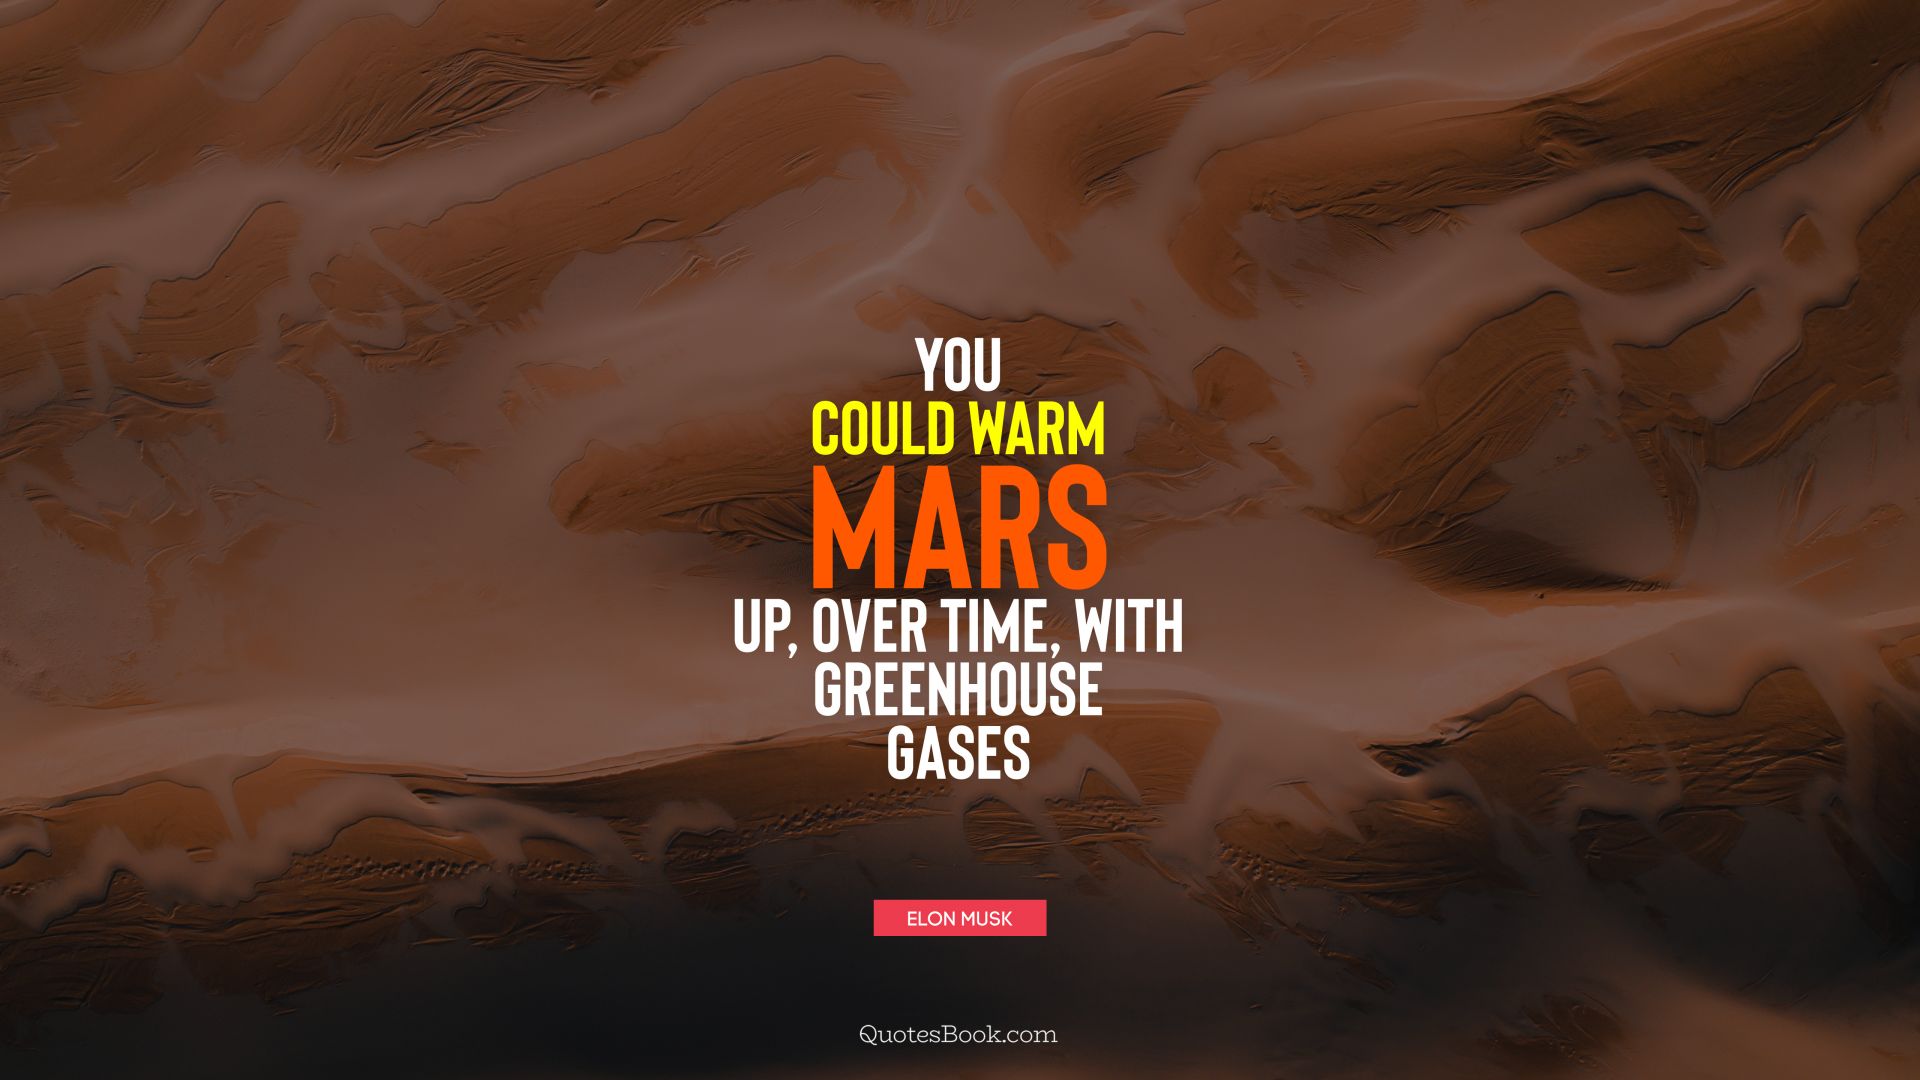 You could warm Mars up, over time, with greenhouse gases. - Quote by Elon Musk